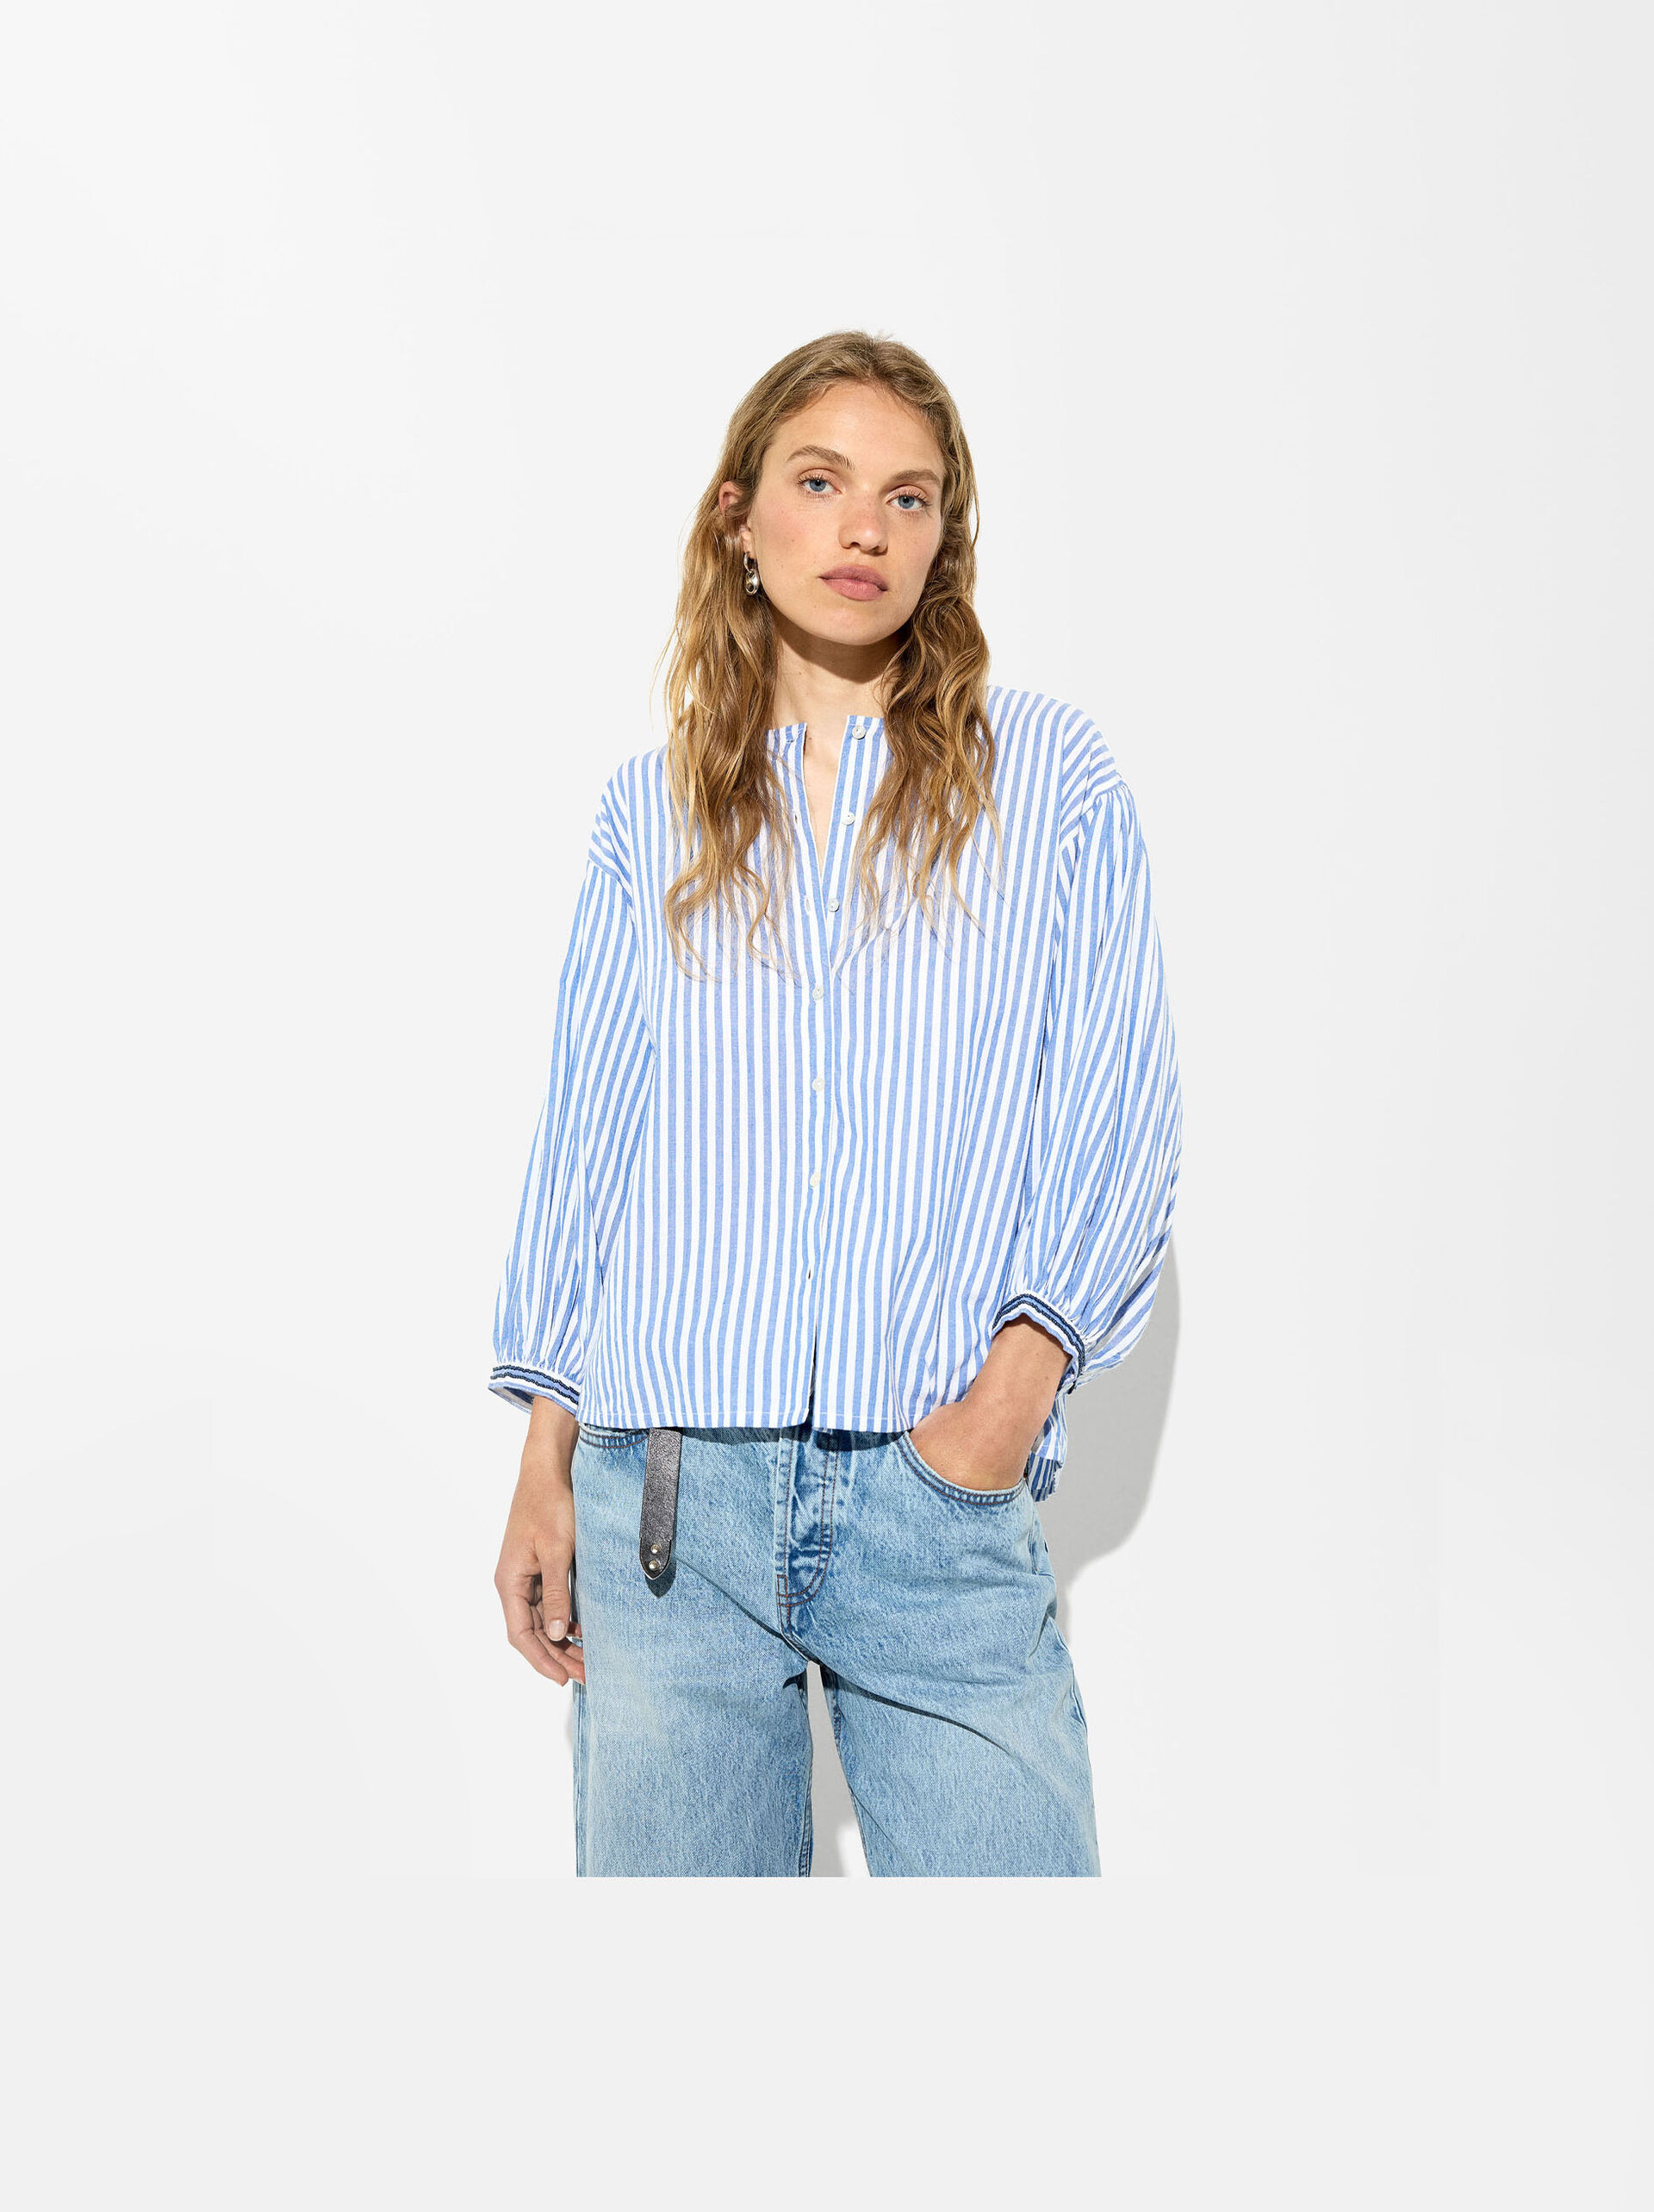 100% Cotton Striped Shirt image number 6.0